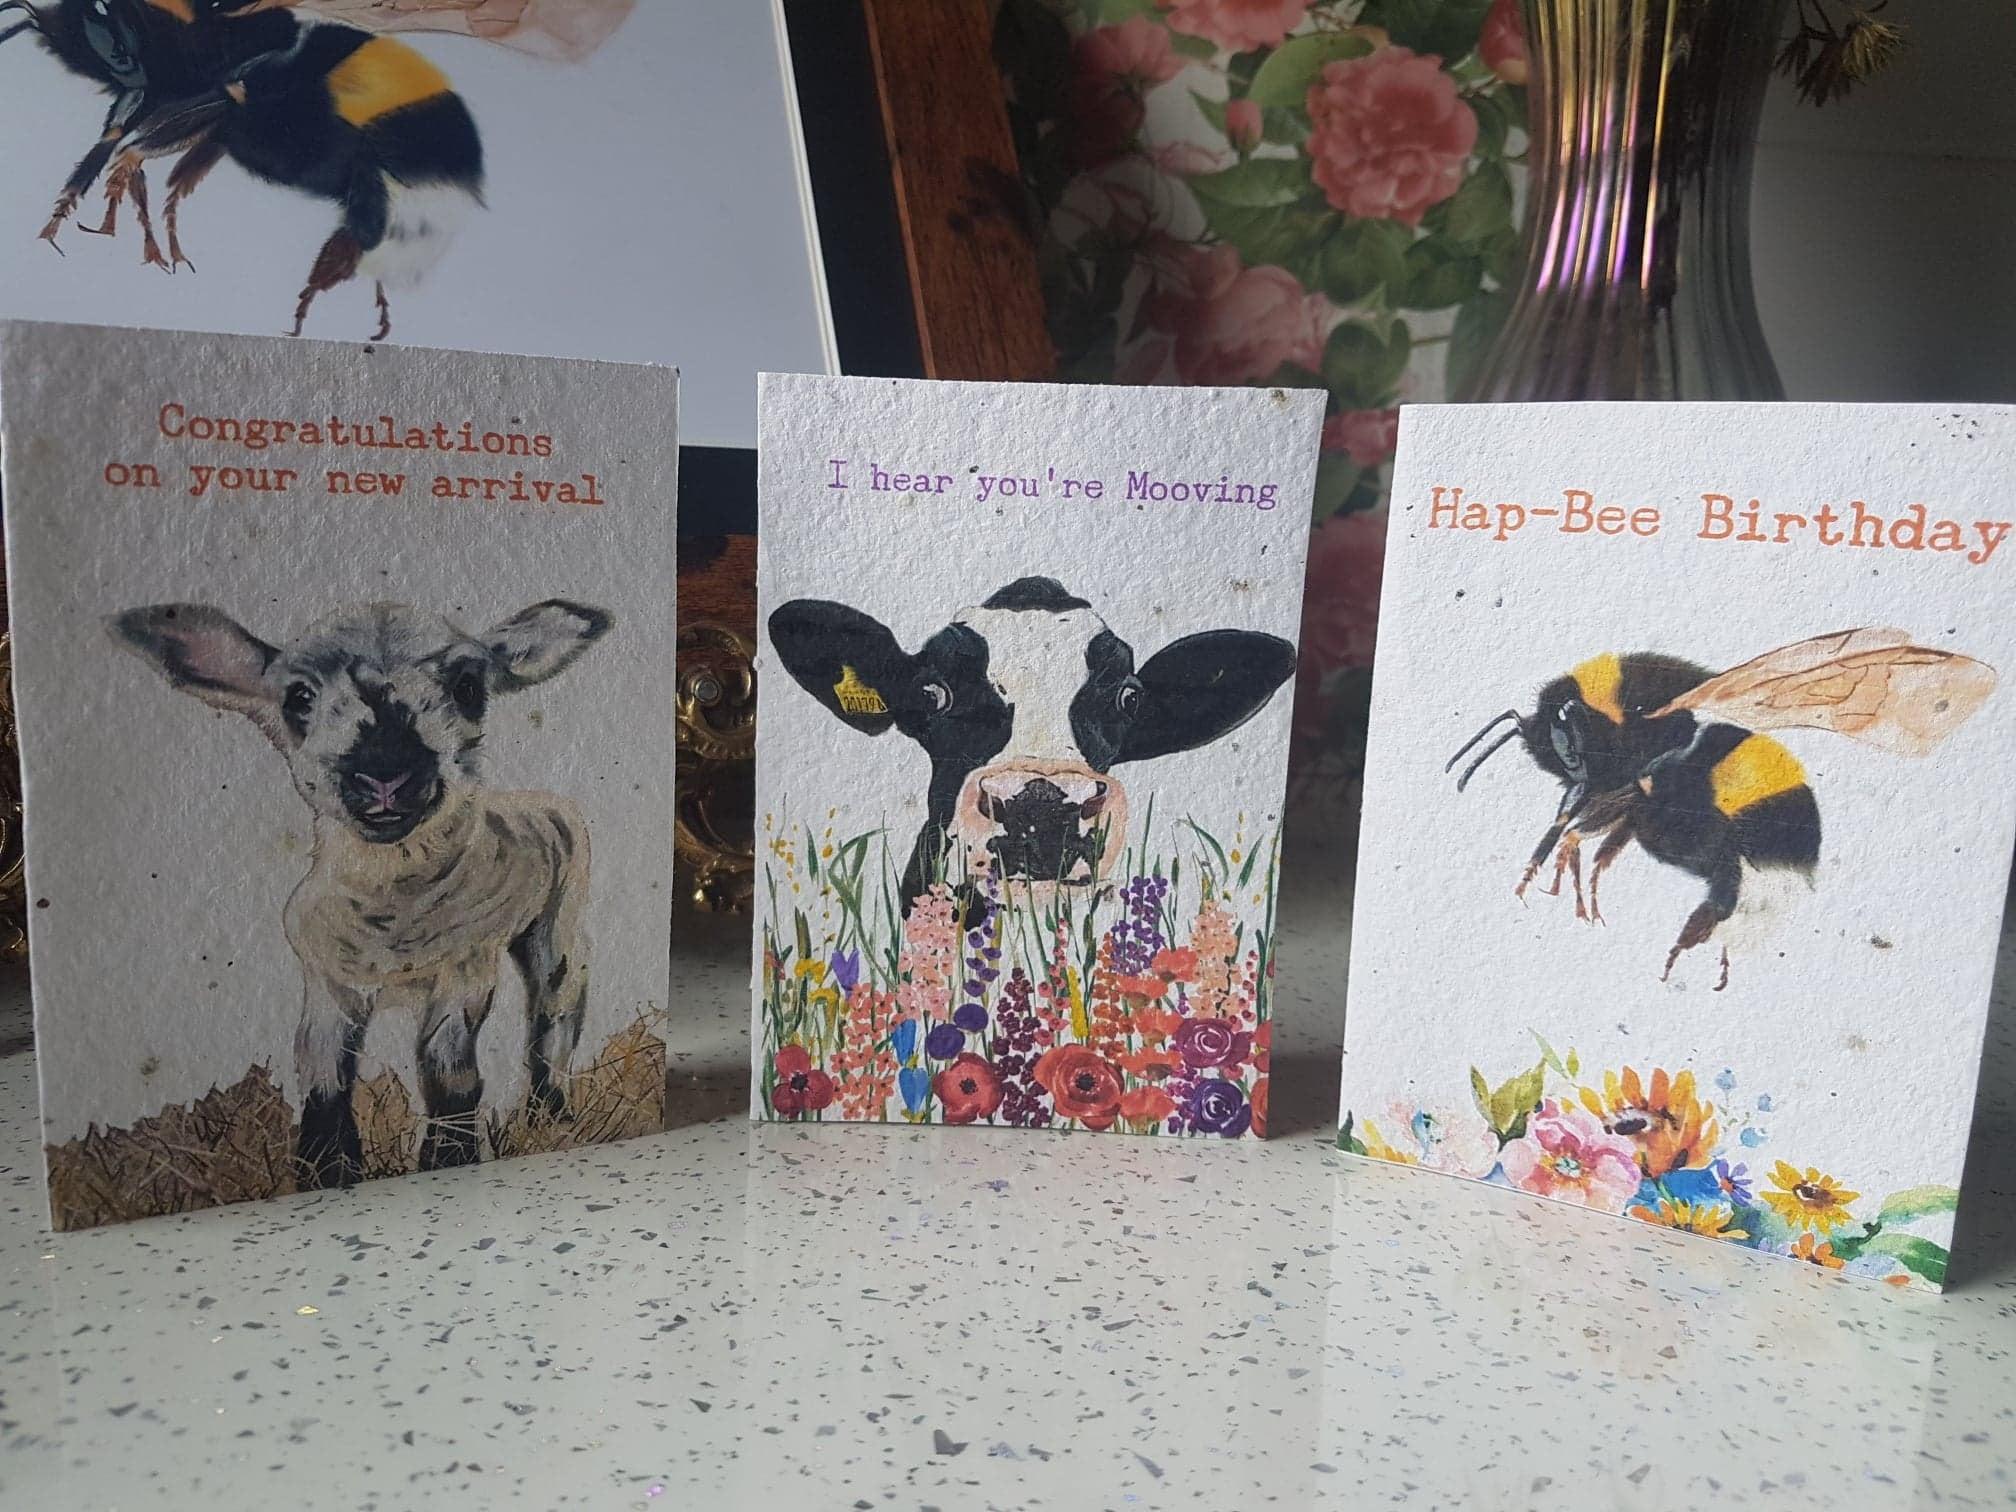 PLANTABLE  Seed Cards- Bee Cards - Wildflower cards - New Baby cards - Baby shower cards - flower bomb cards- On your new arrival - Baby boy